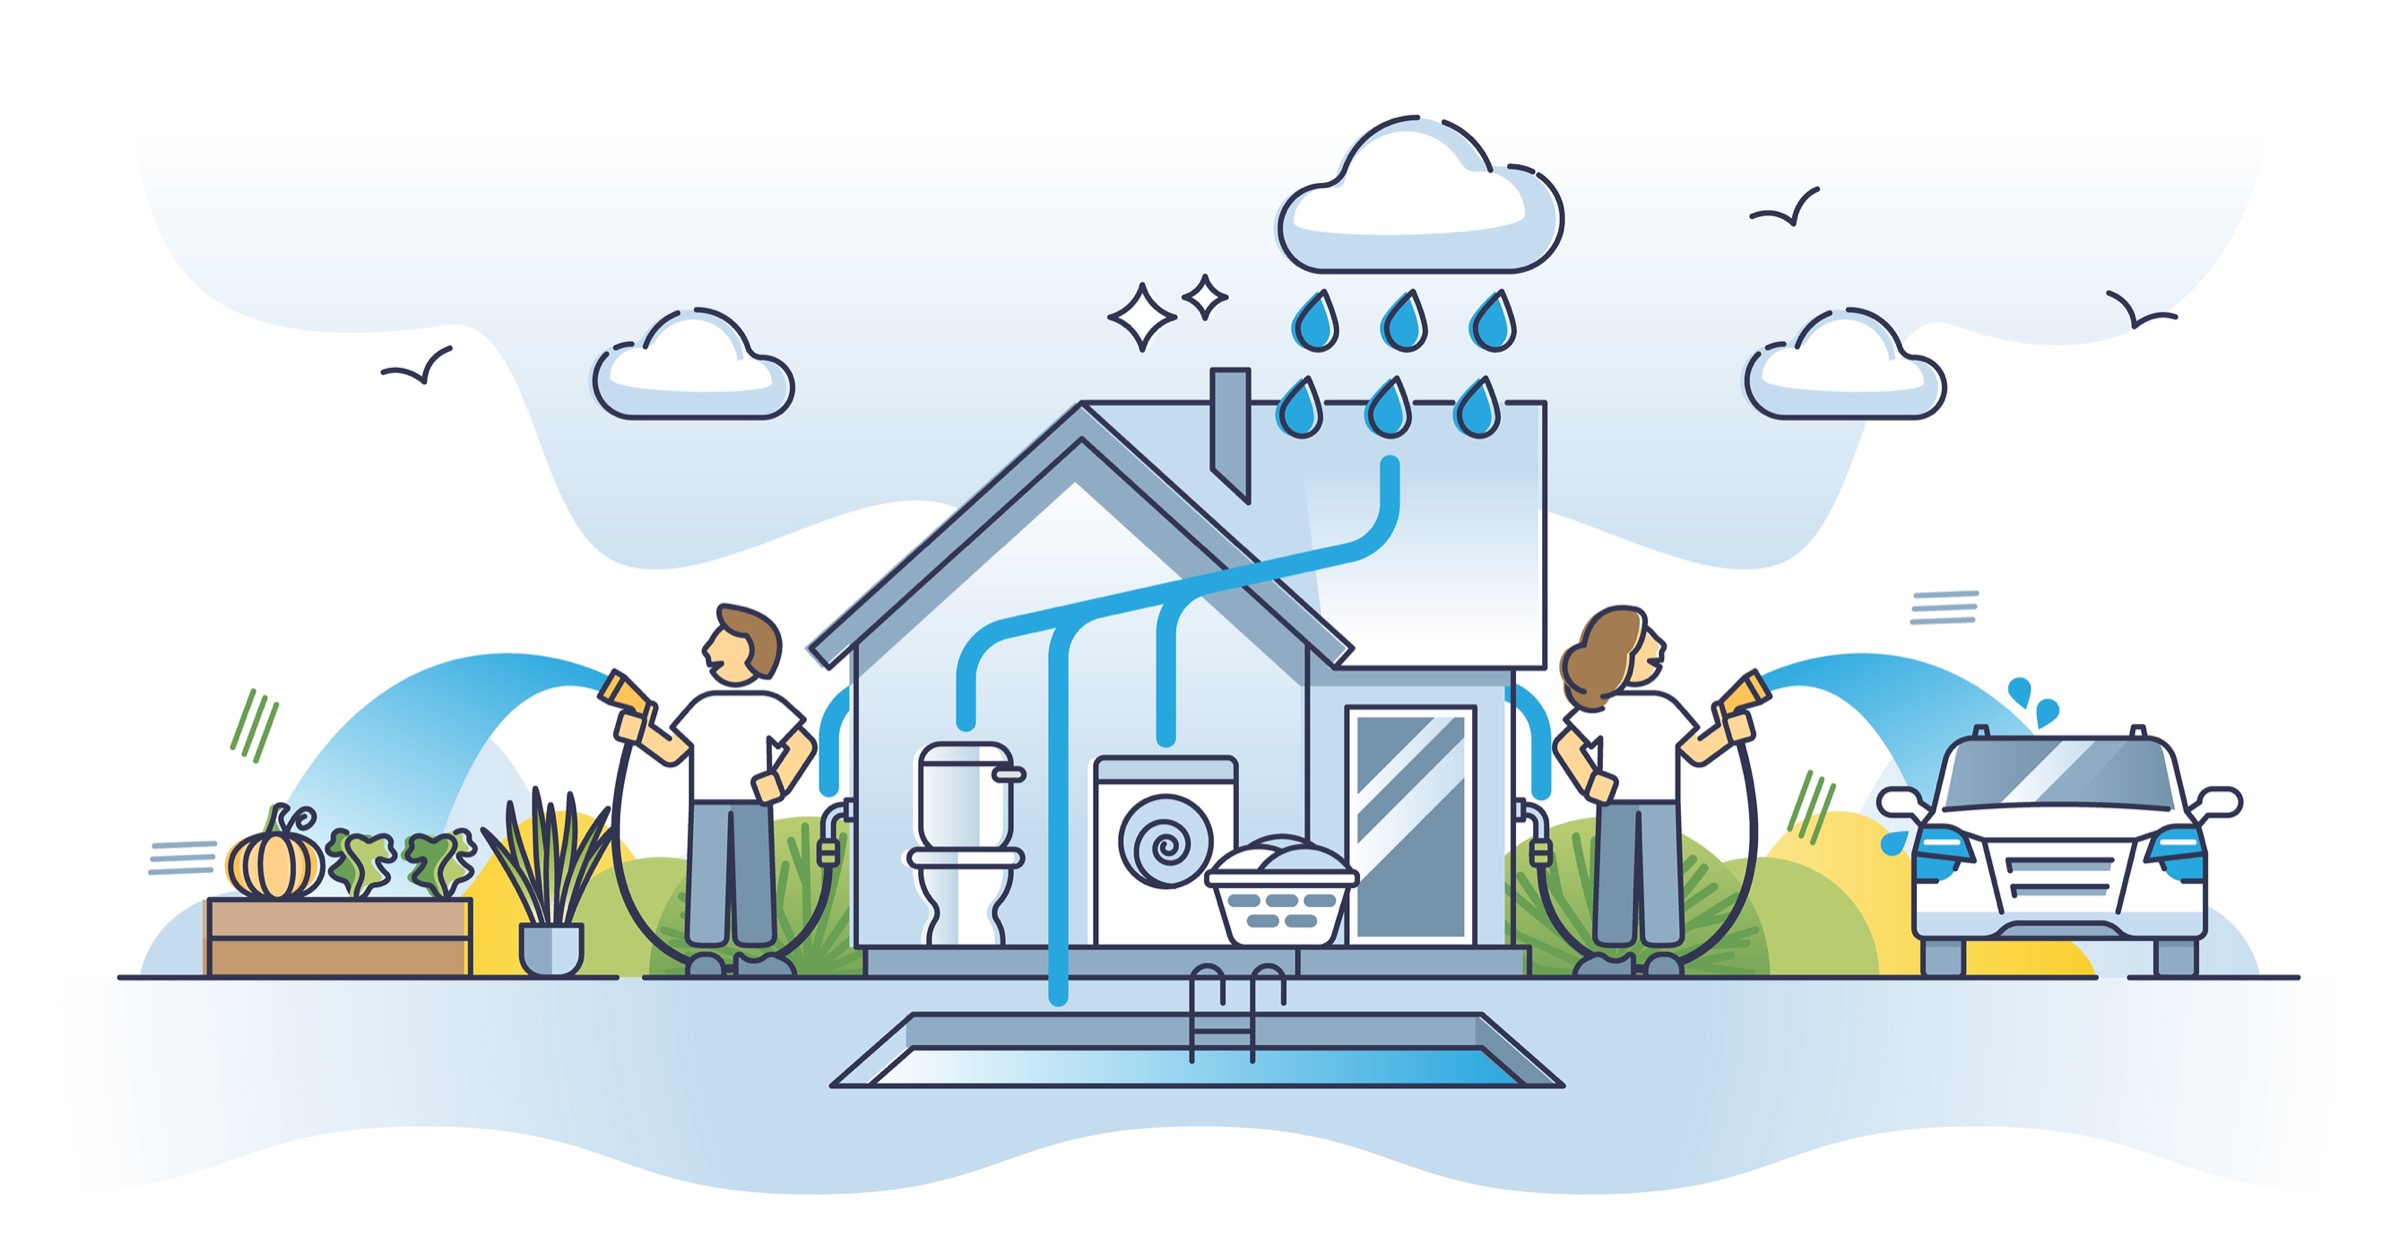 Rainwater harvesting as rain water collection and storage outline diagram.